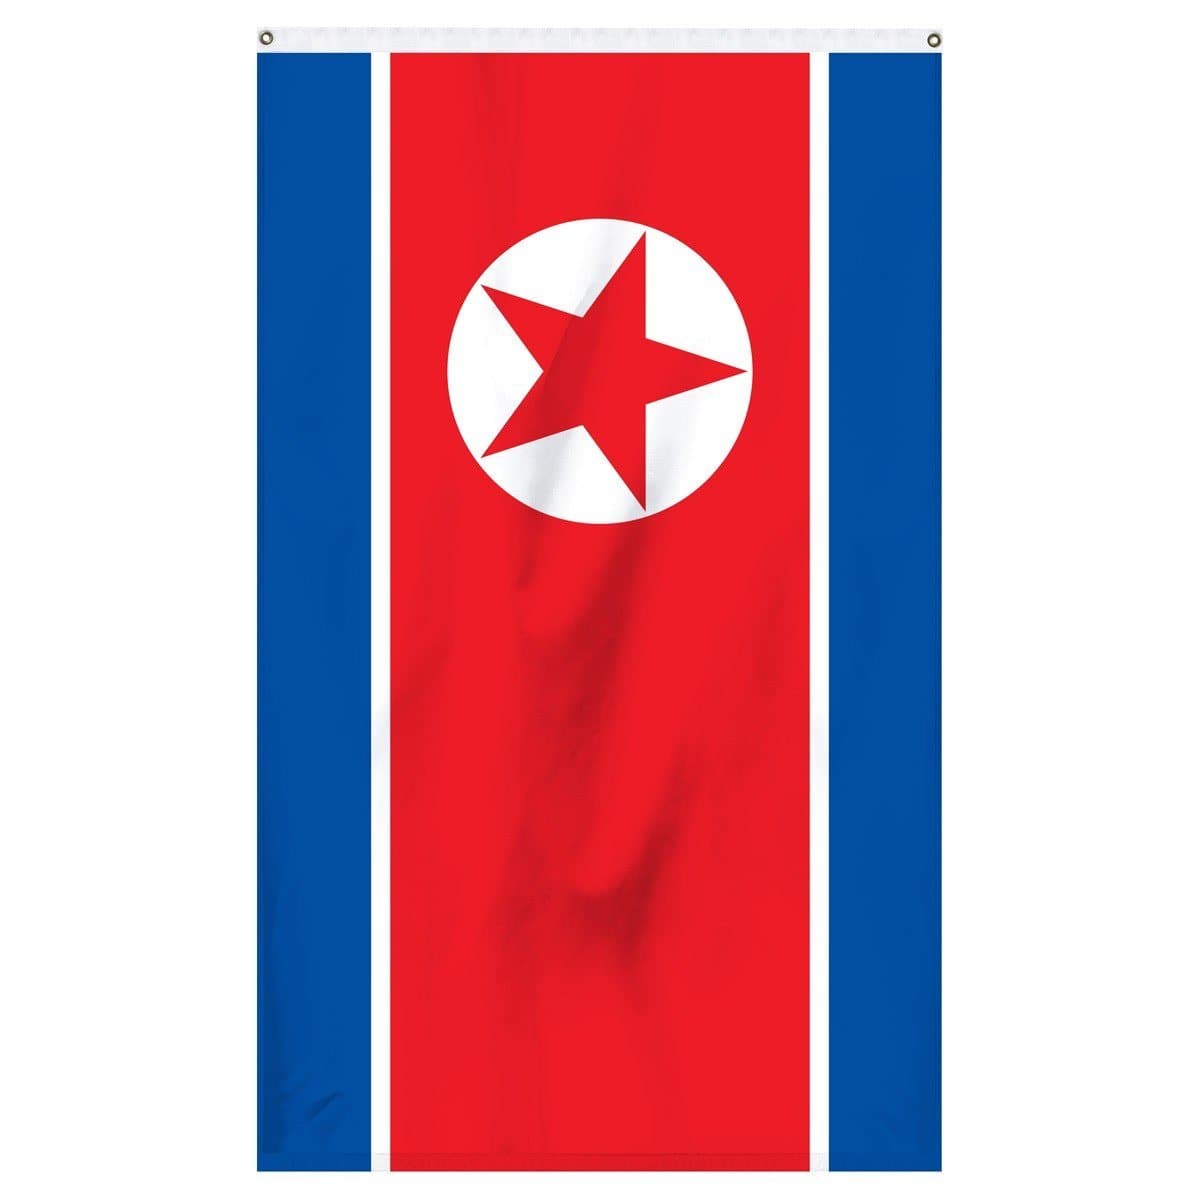 North Korea national flag for sale to buy online. Made in america flag.